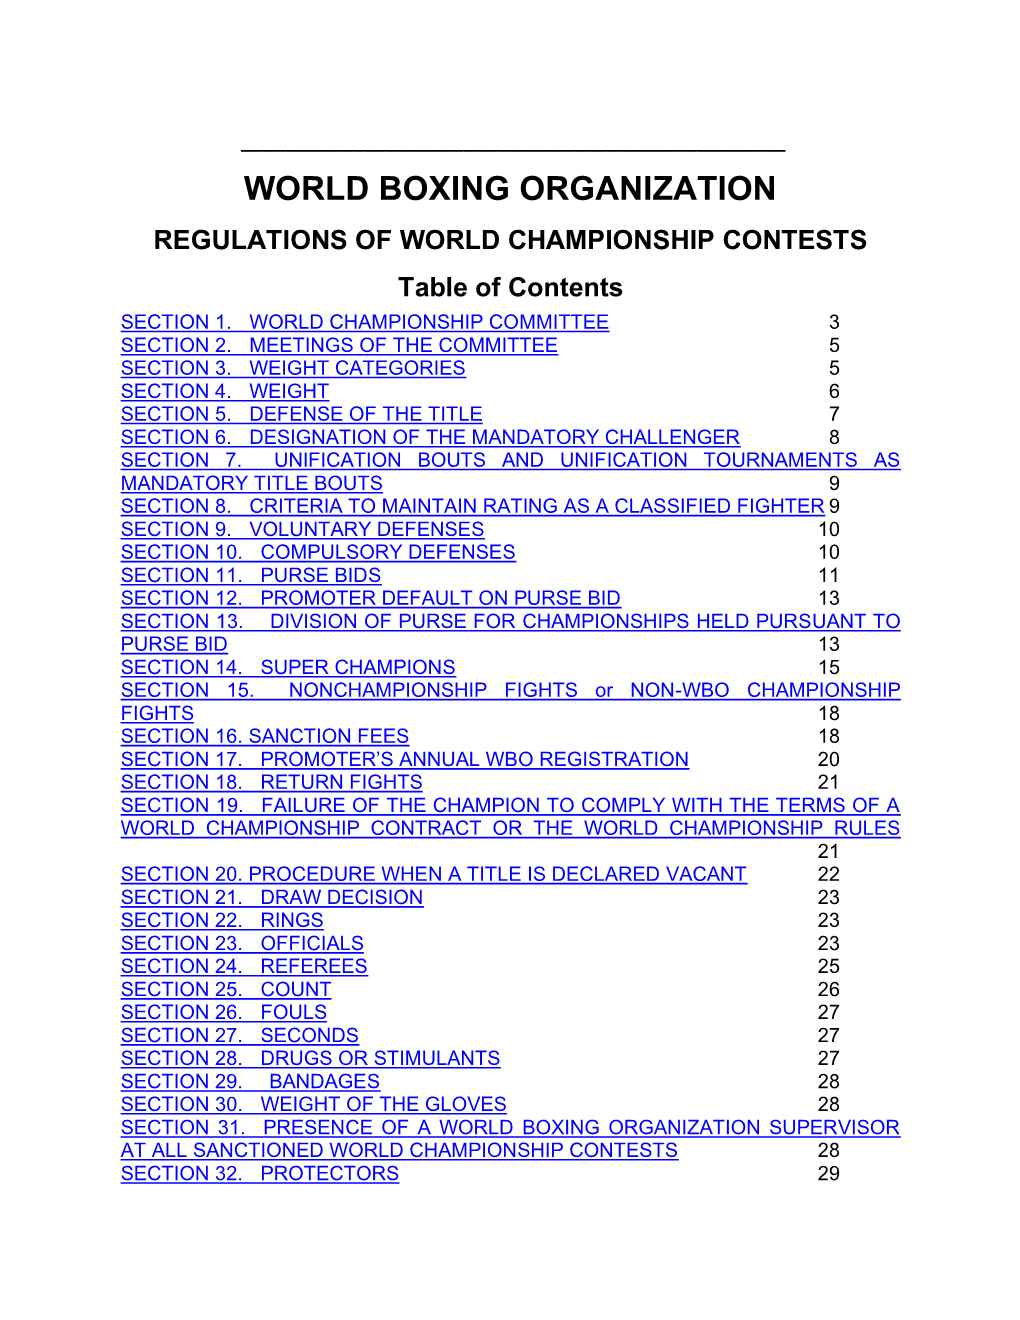 REGULATIONS of WORLD CHAMPIONSHIP CONTESTS Table of Contents SECTION 1